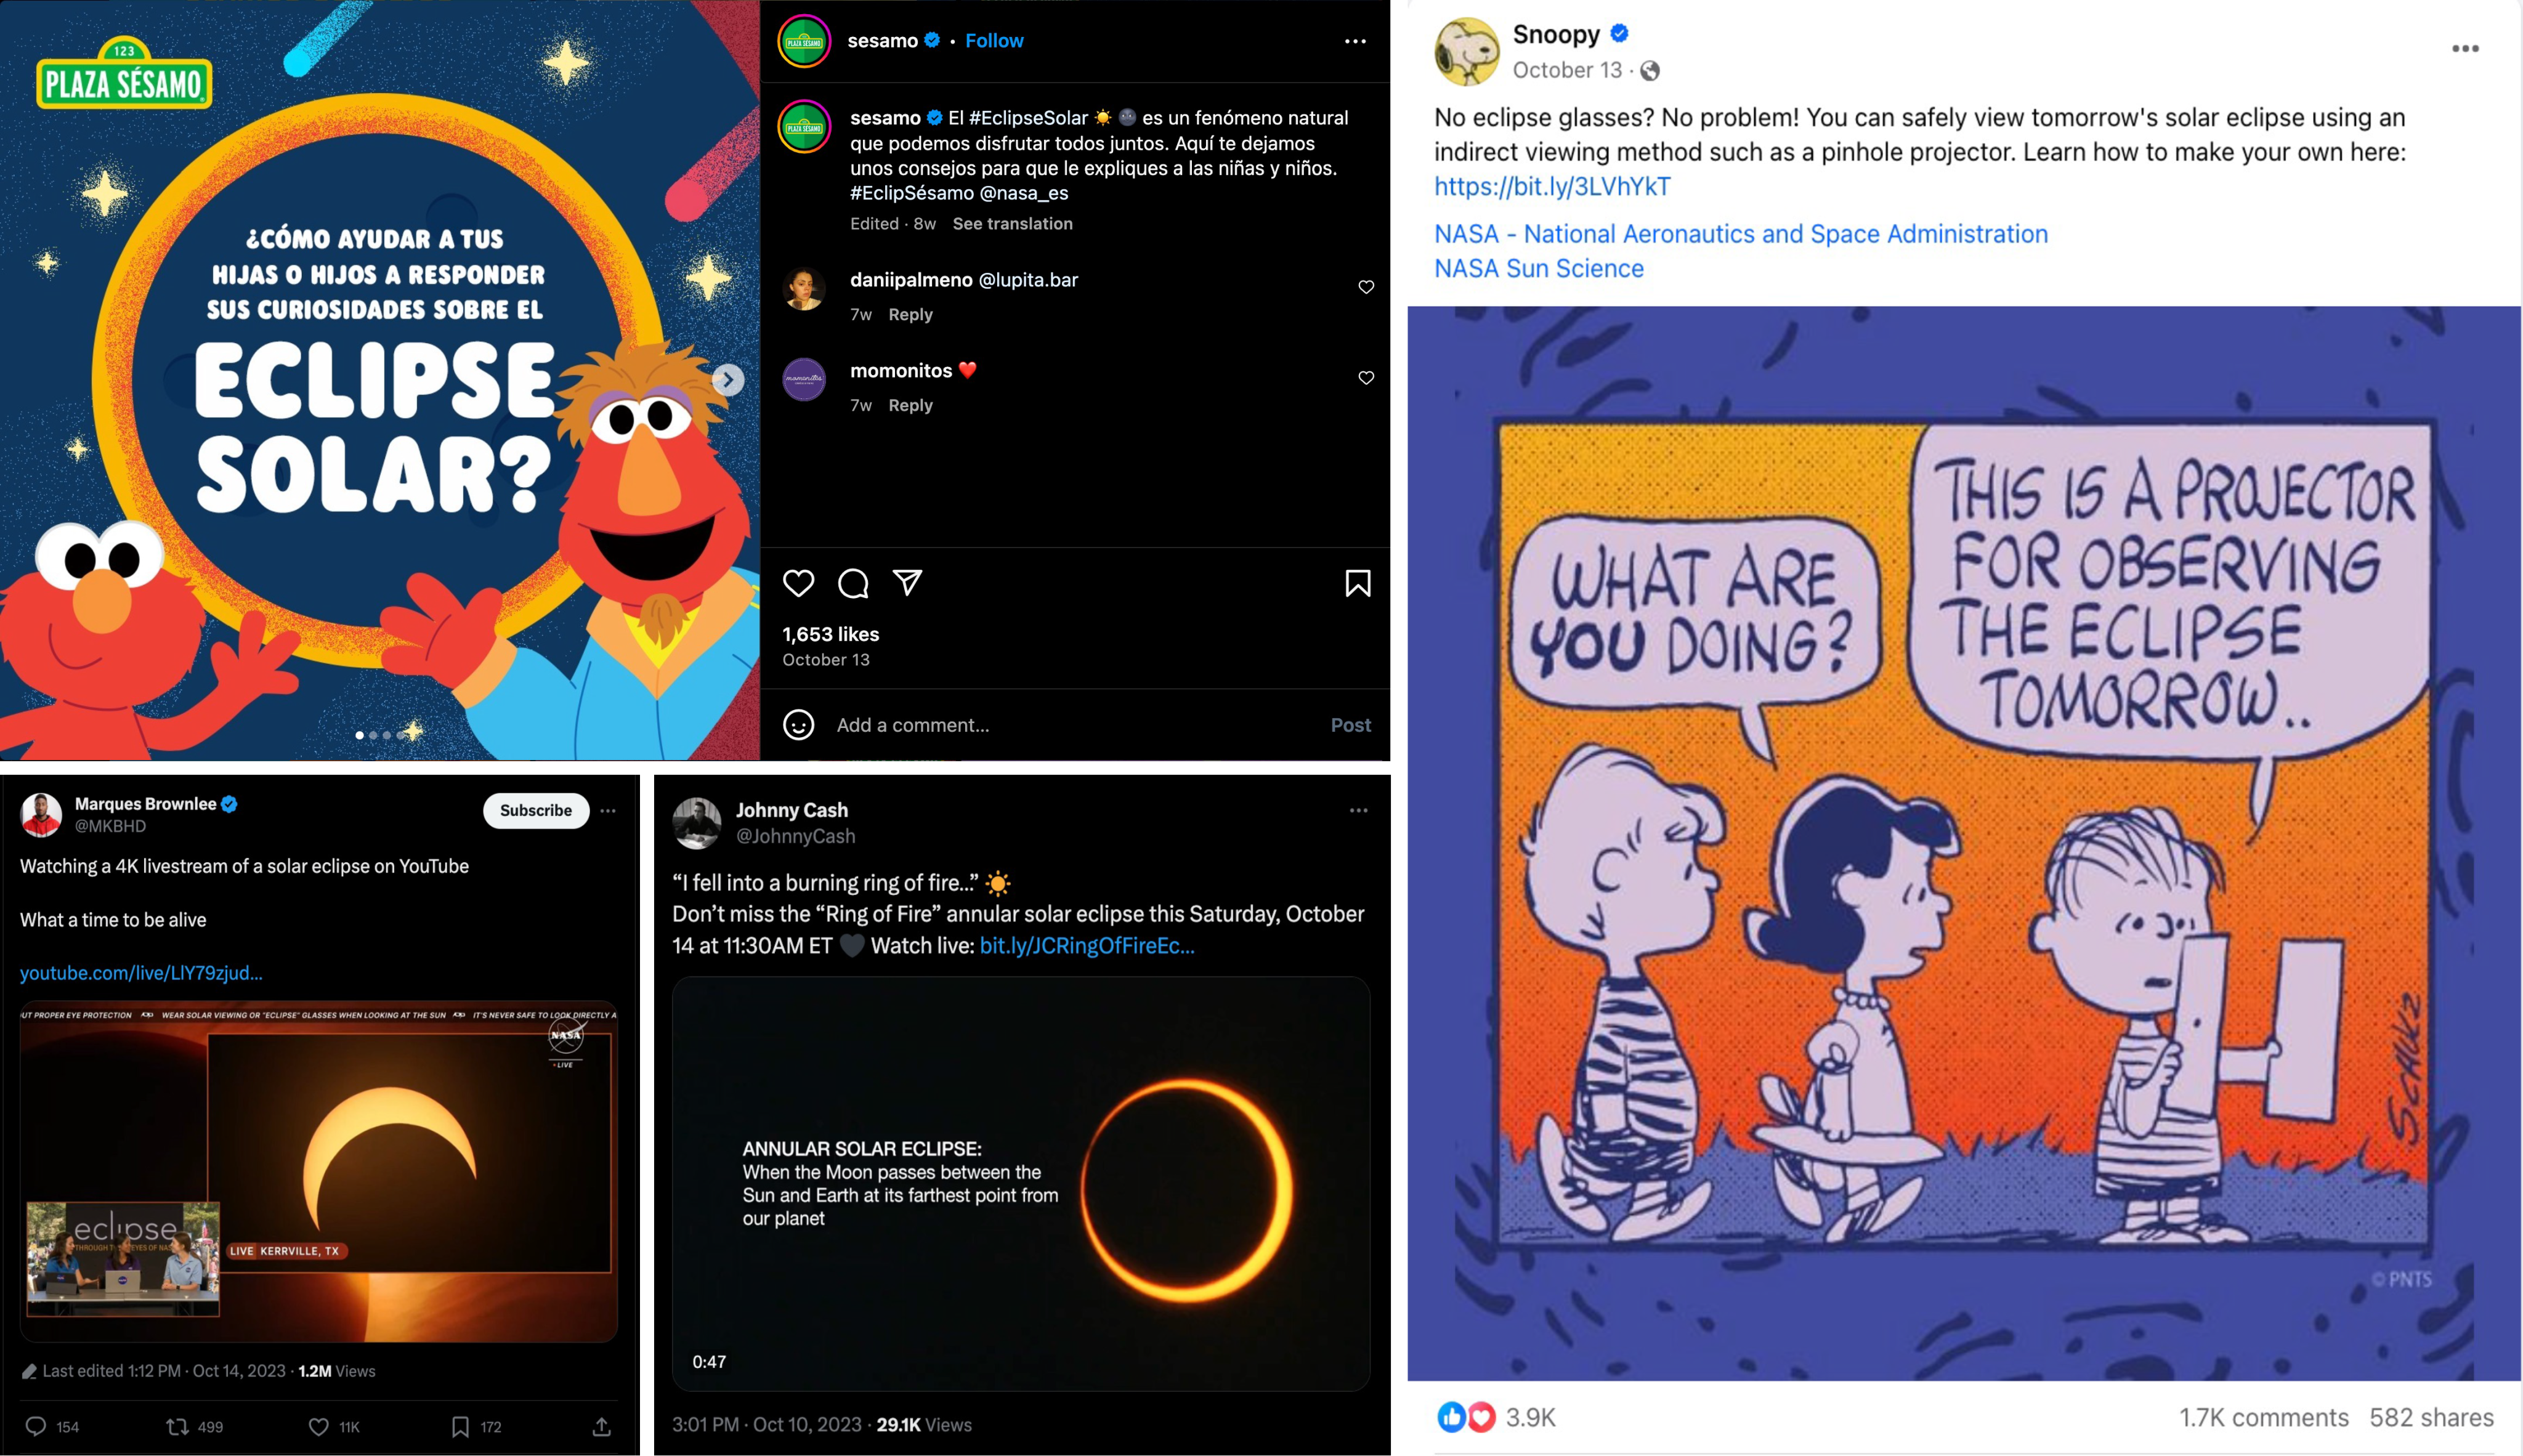 Screenshots of four social media posts – one from Plaza Sesamo, one from Johnny Cash, one from Snoopy, and one from Marques Brownlee